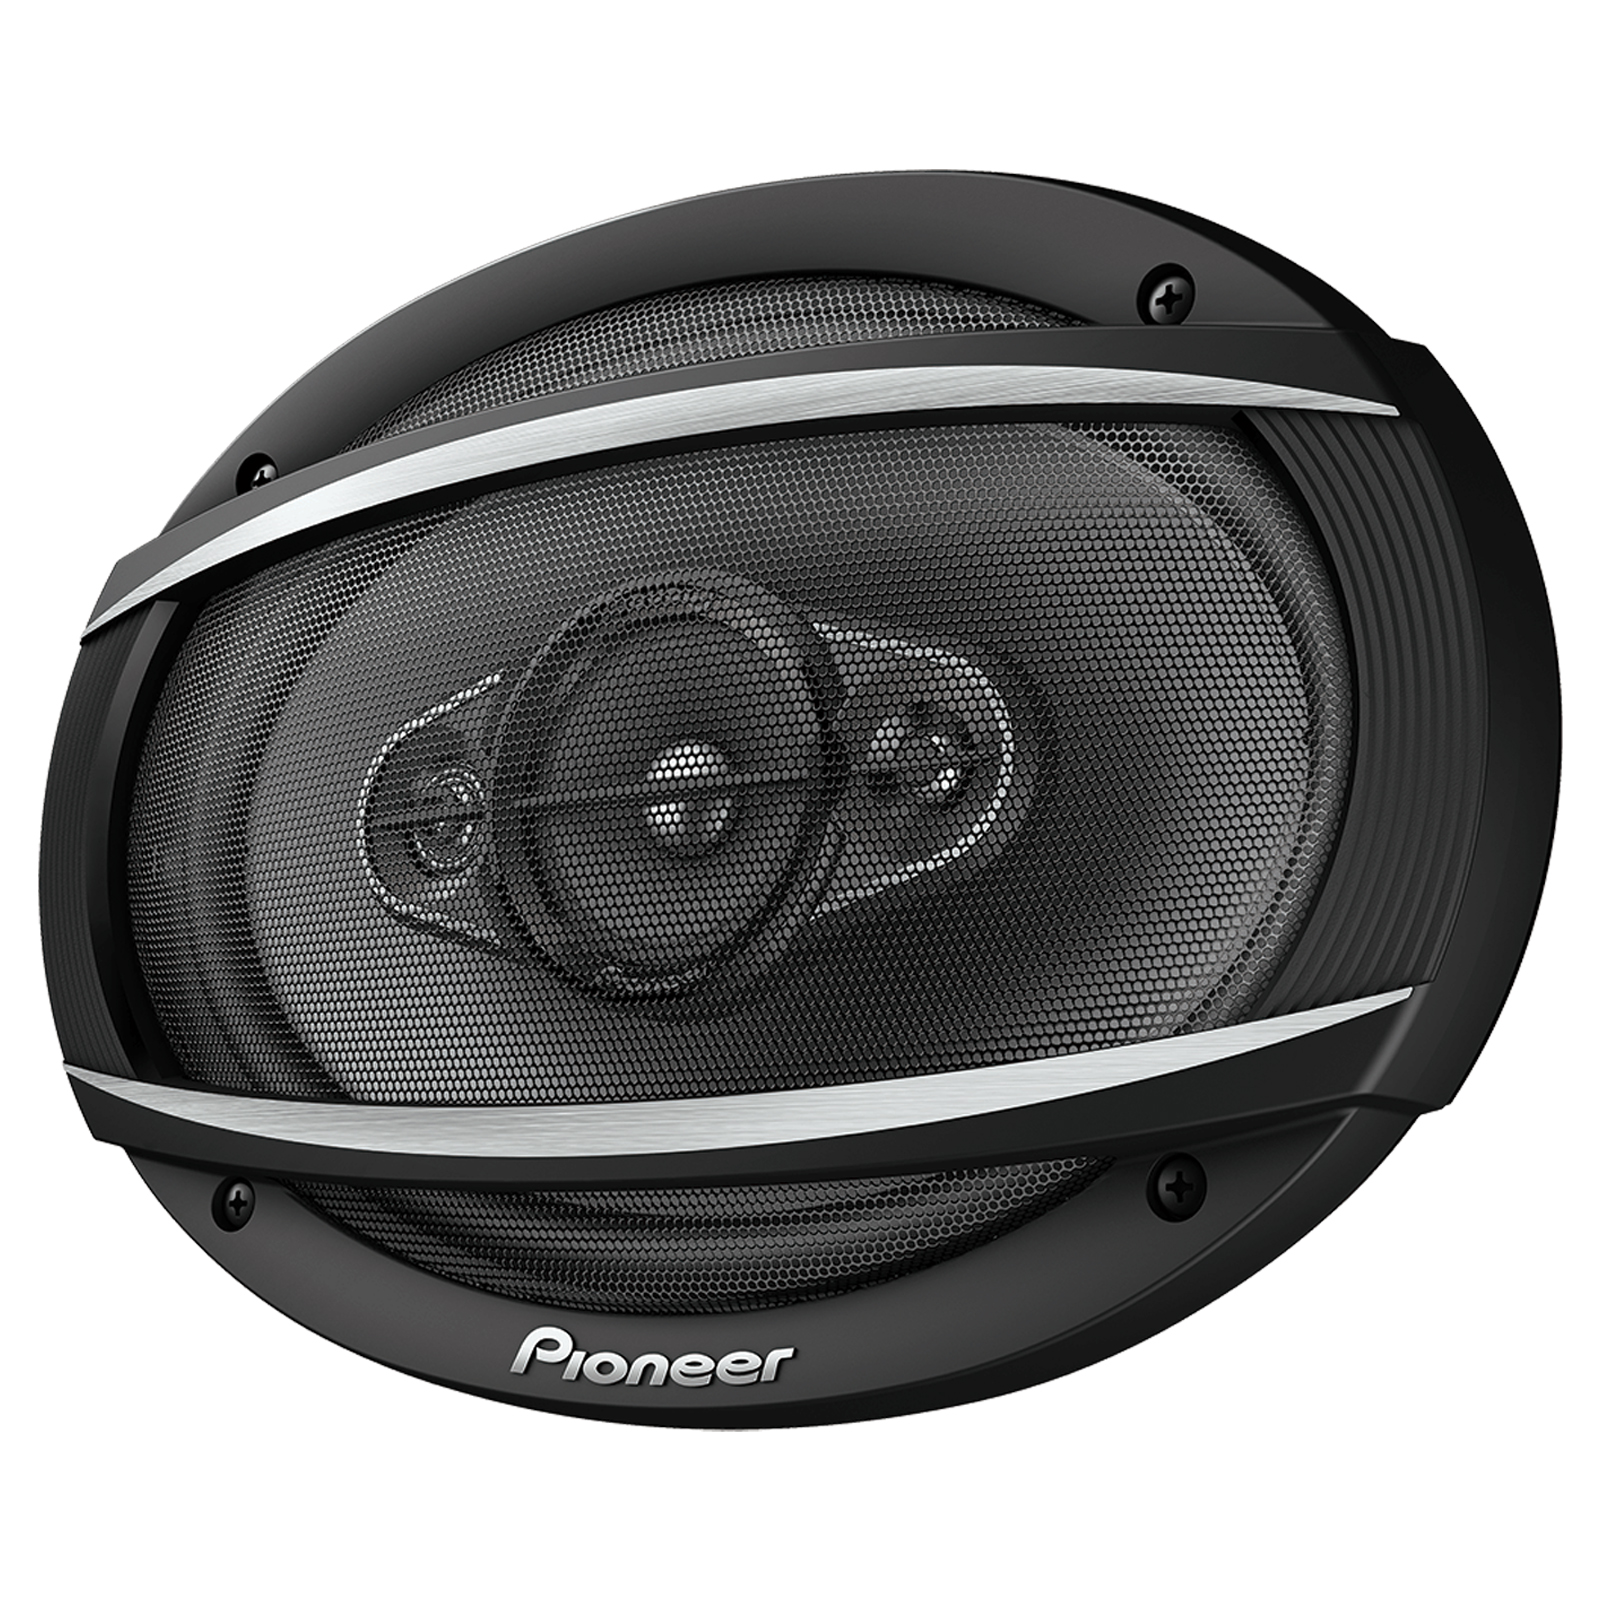 Pioneer TS-A6967S A-Series 6x9" shallow 4-Way 450 Watts Max Power Black Car Audio Speakers (Pair) - image 2 of 4